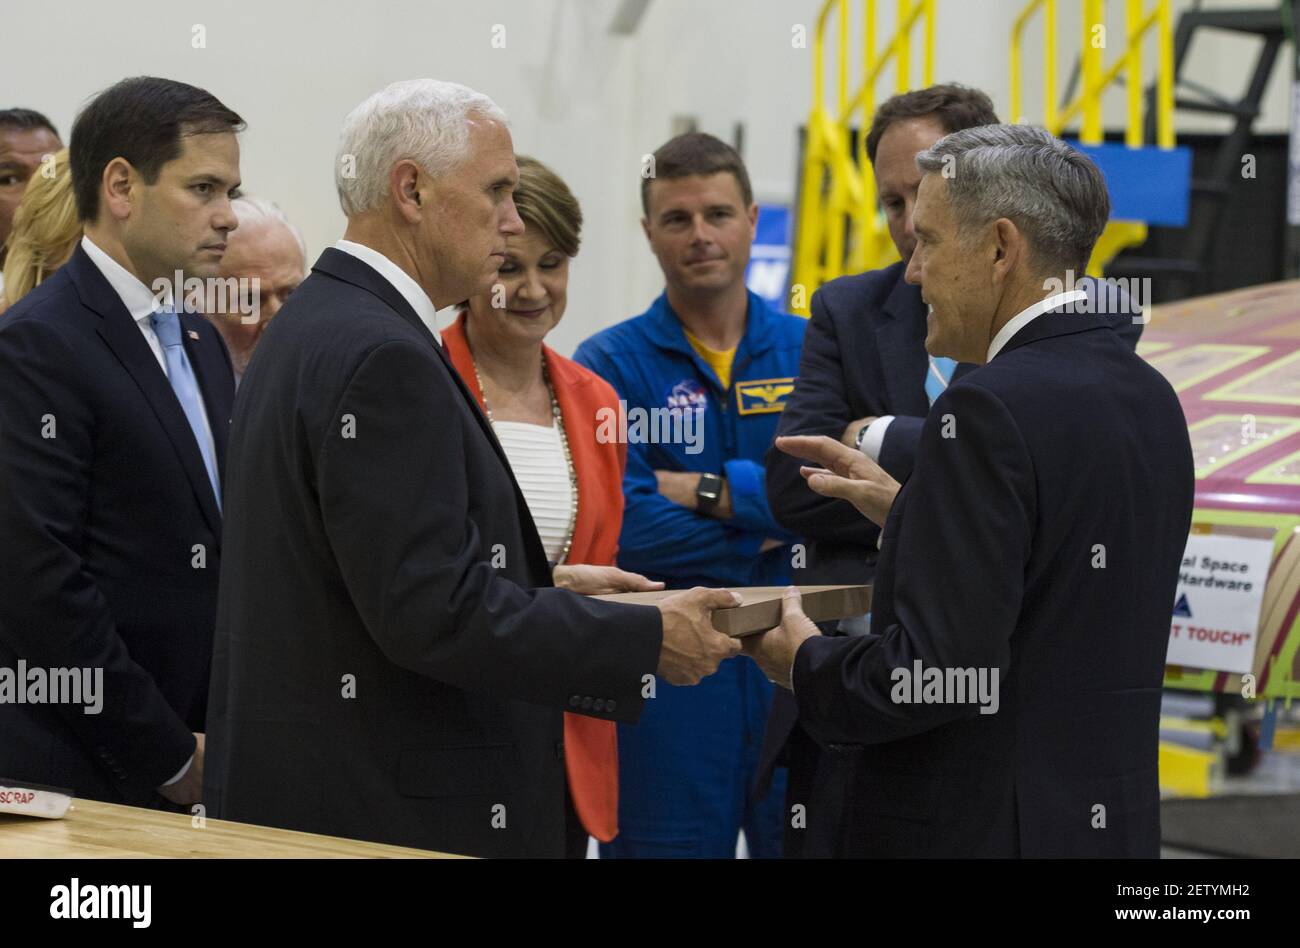 In this photo released by the National Aeronautics and Space Administration (NASA) United States Vice President Mike Pence, left, looks at a component of Orion’s heat shield during a visit to the Operations and Checkout Building at Kennedy Space Center (KSC) on Thursday, July 6, 2017 in Cape Canaveral, Florida. Looking on from left is US Senator Marco Rubio (Republican of Florida). (Photo by Aubrey Gemignani/NASA via CNP)*** Please Use Credit from Credit Field ***  Stock Photo